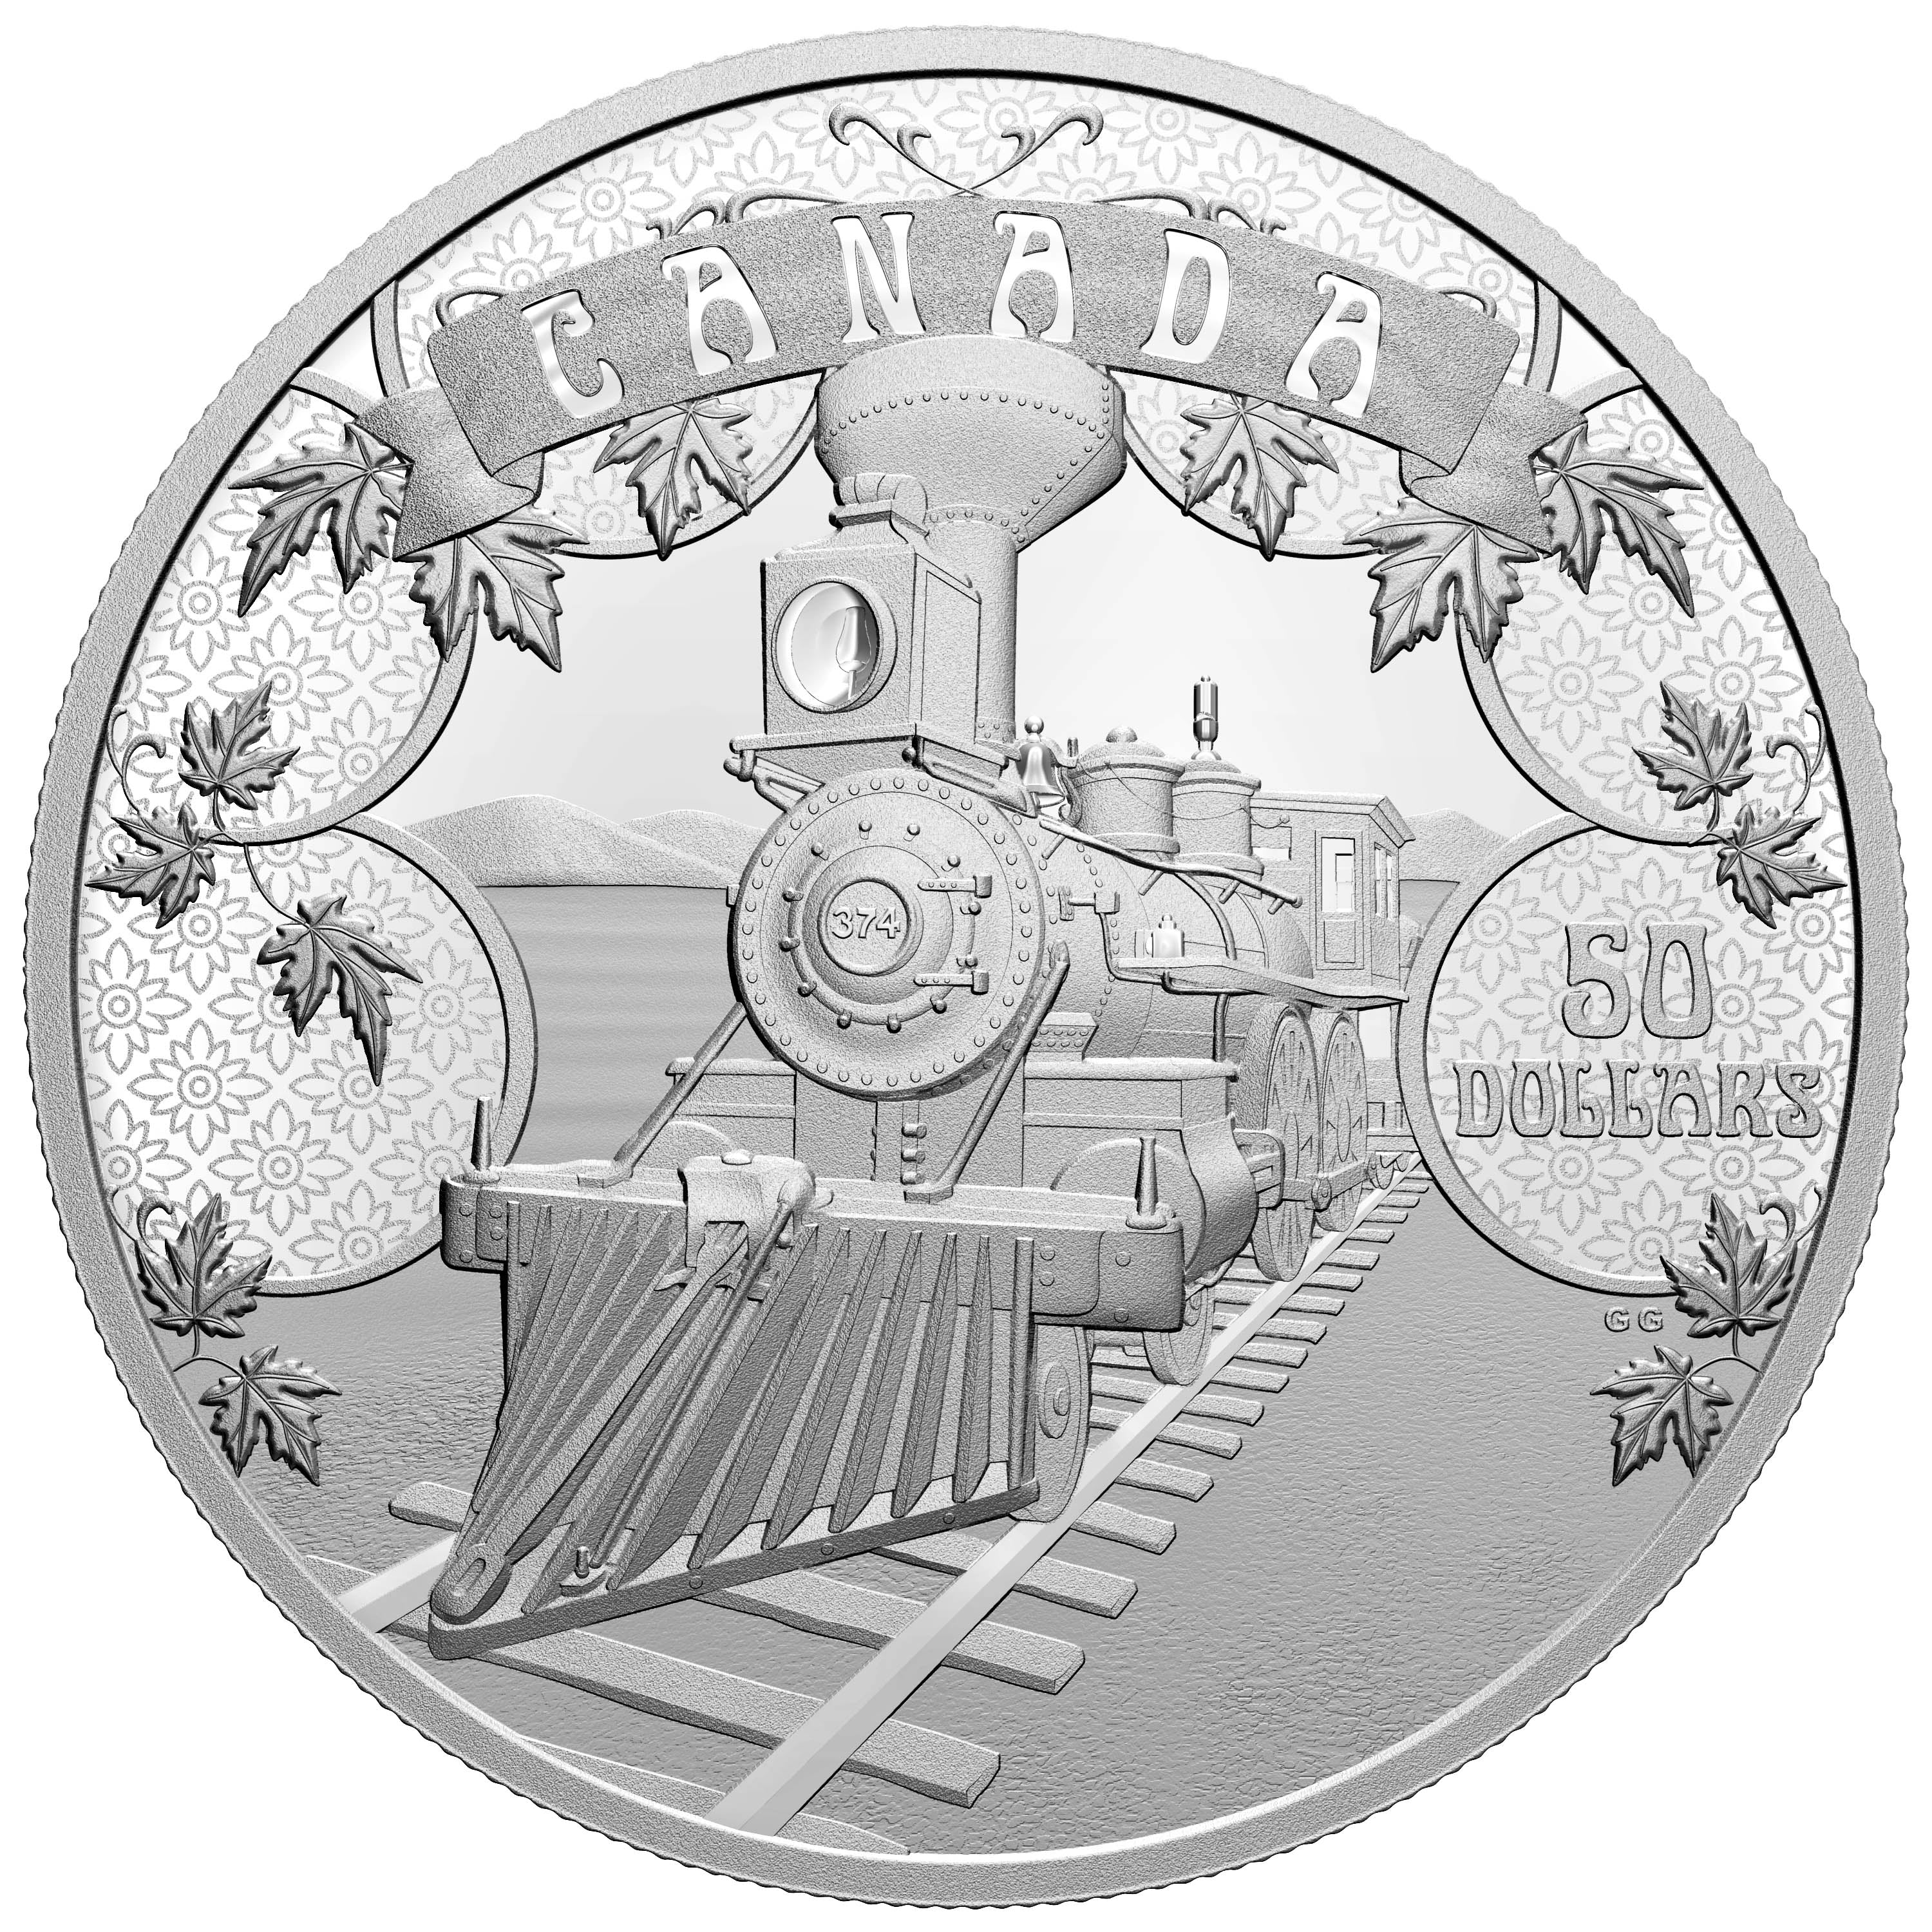 AN EMERGING COUNTRY First 100 Years of Confederation Rail Silver Coin $50 Canada 2021